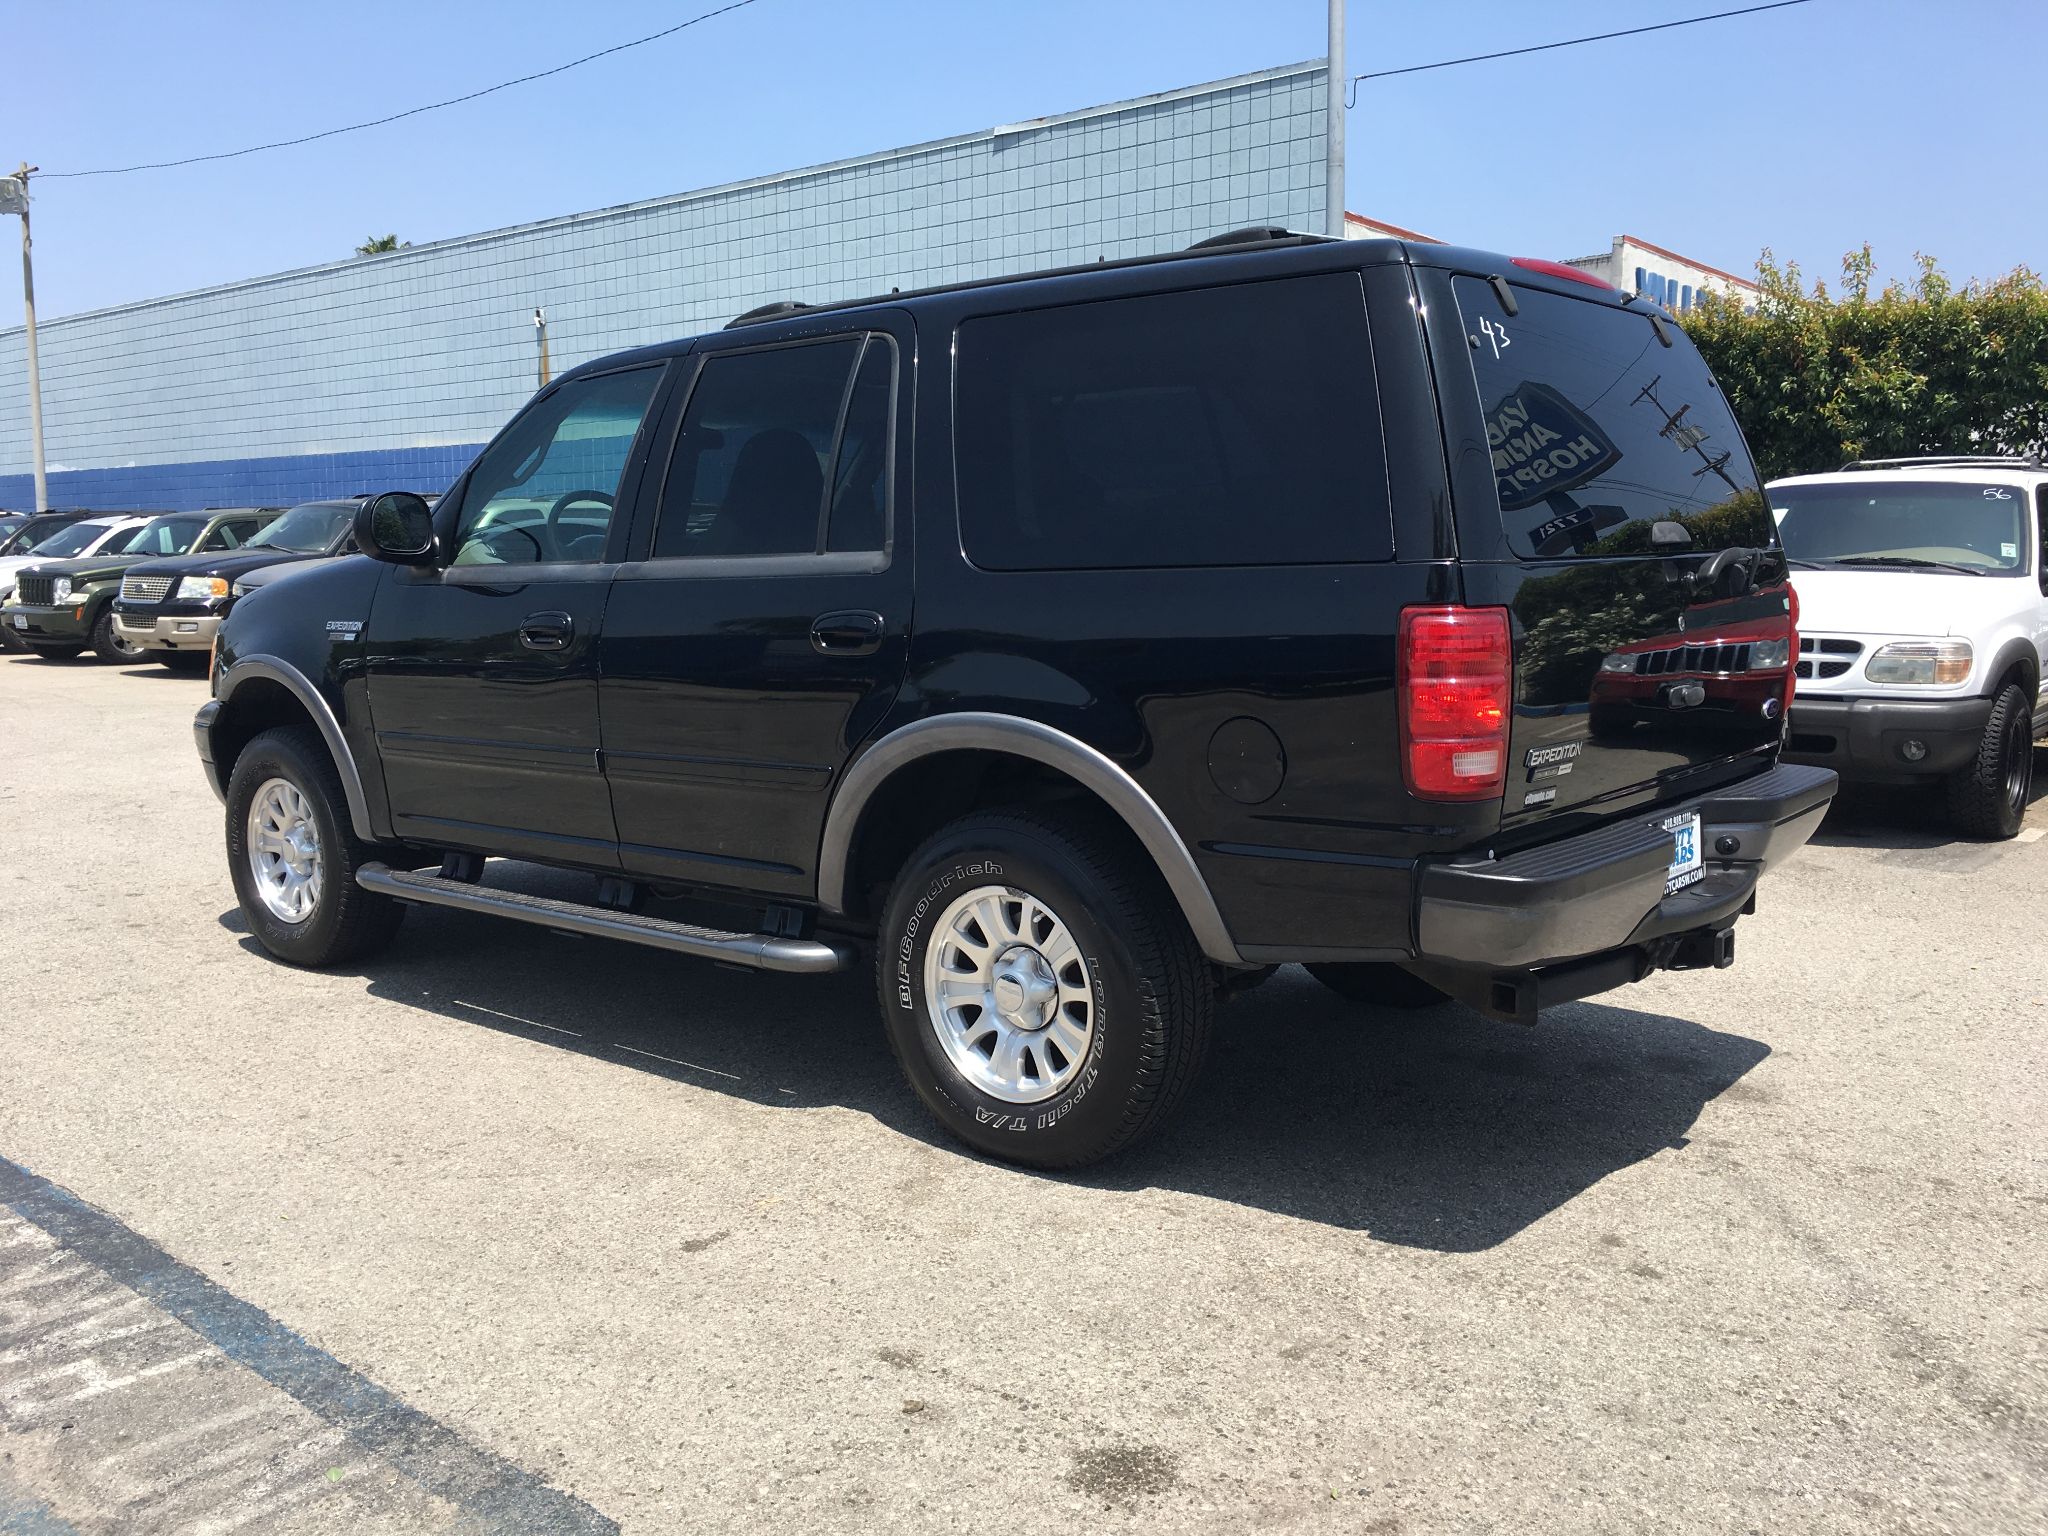 2001 Ford Expedition XLT 4X4